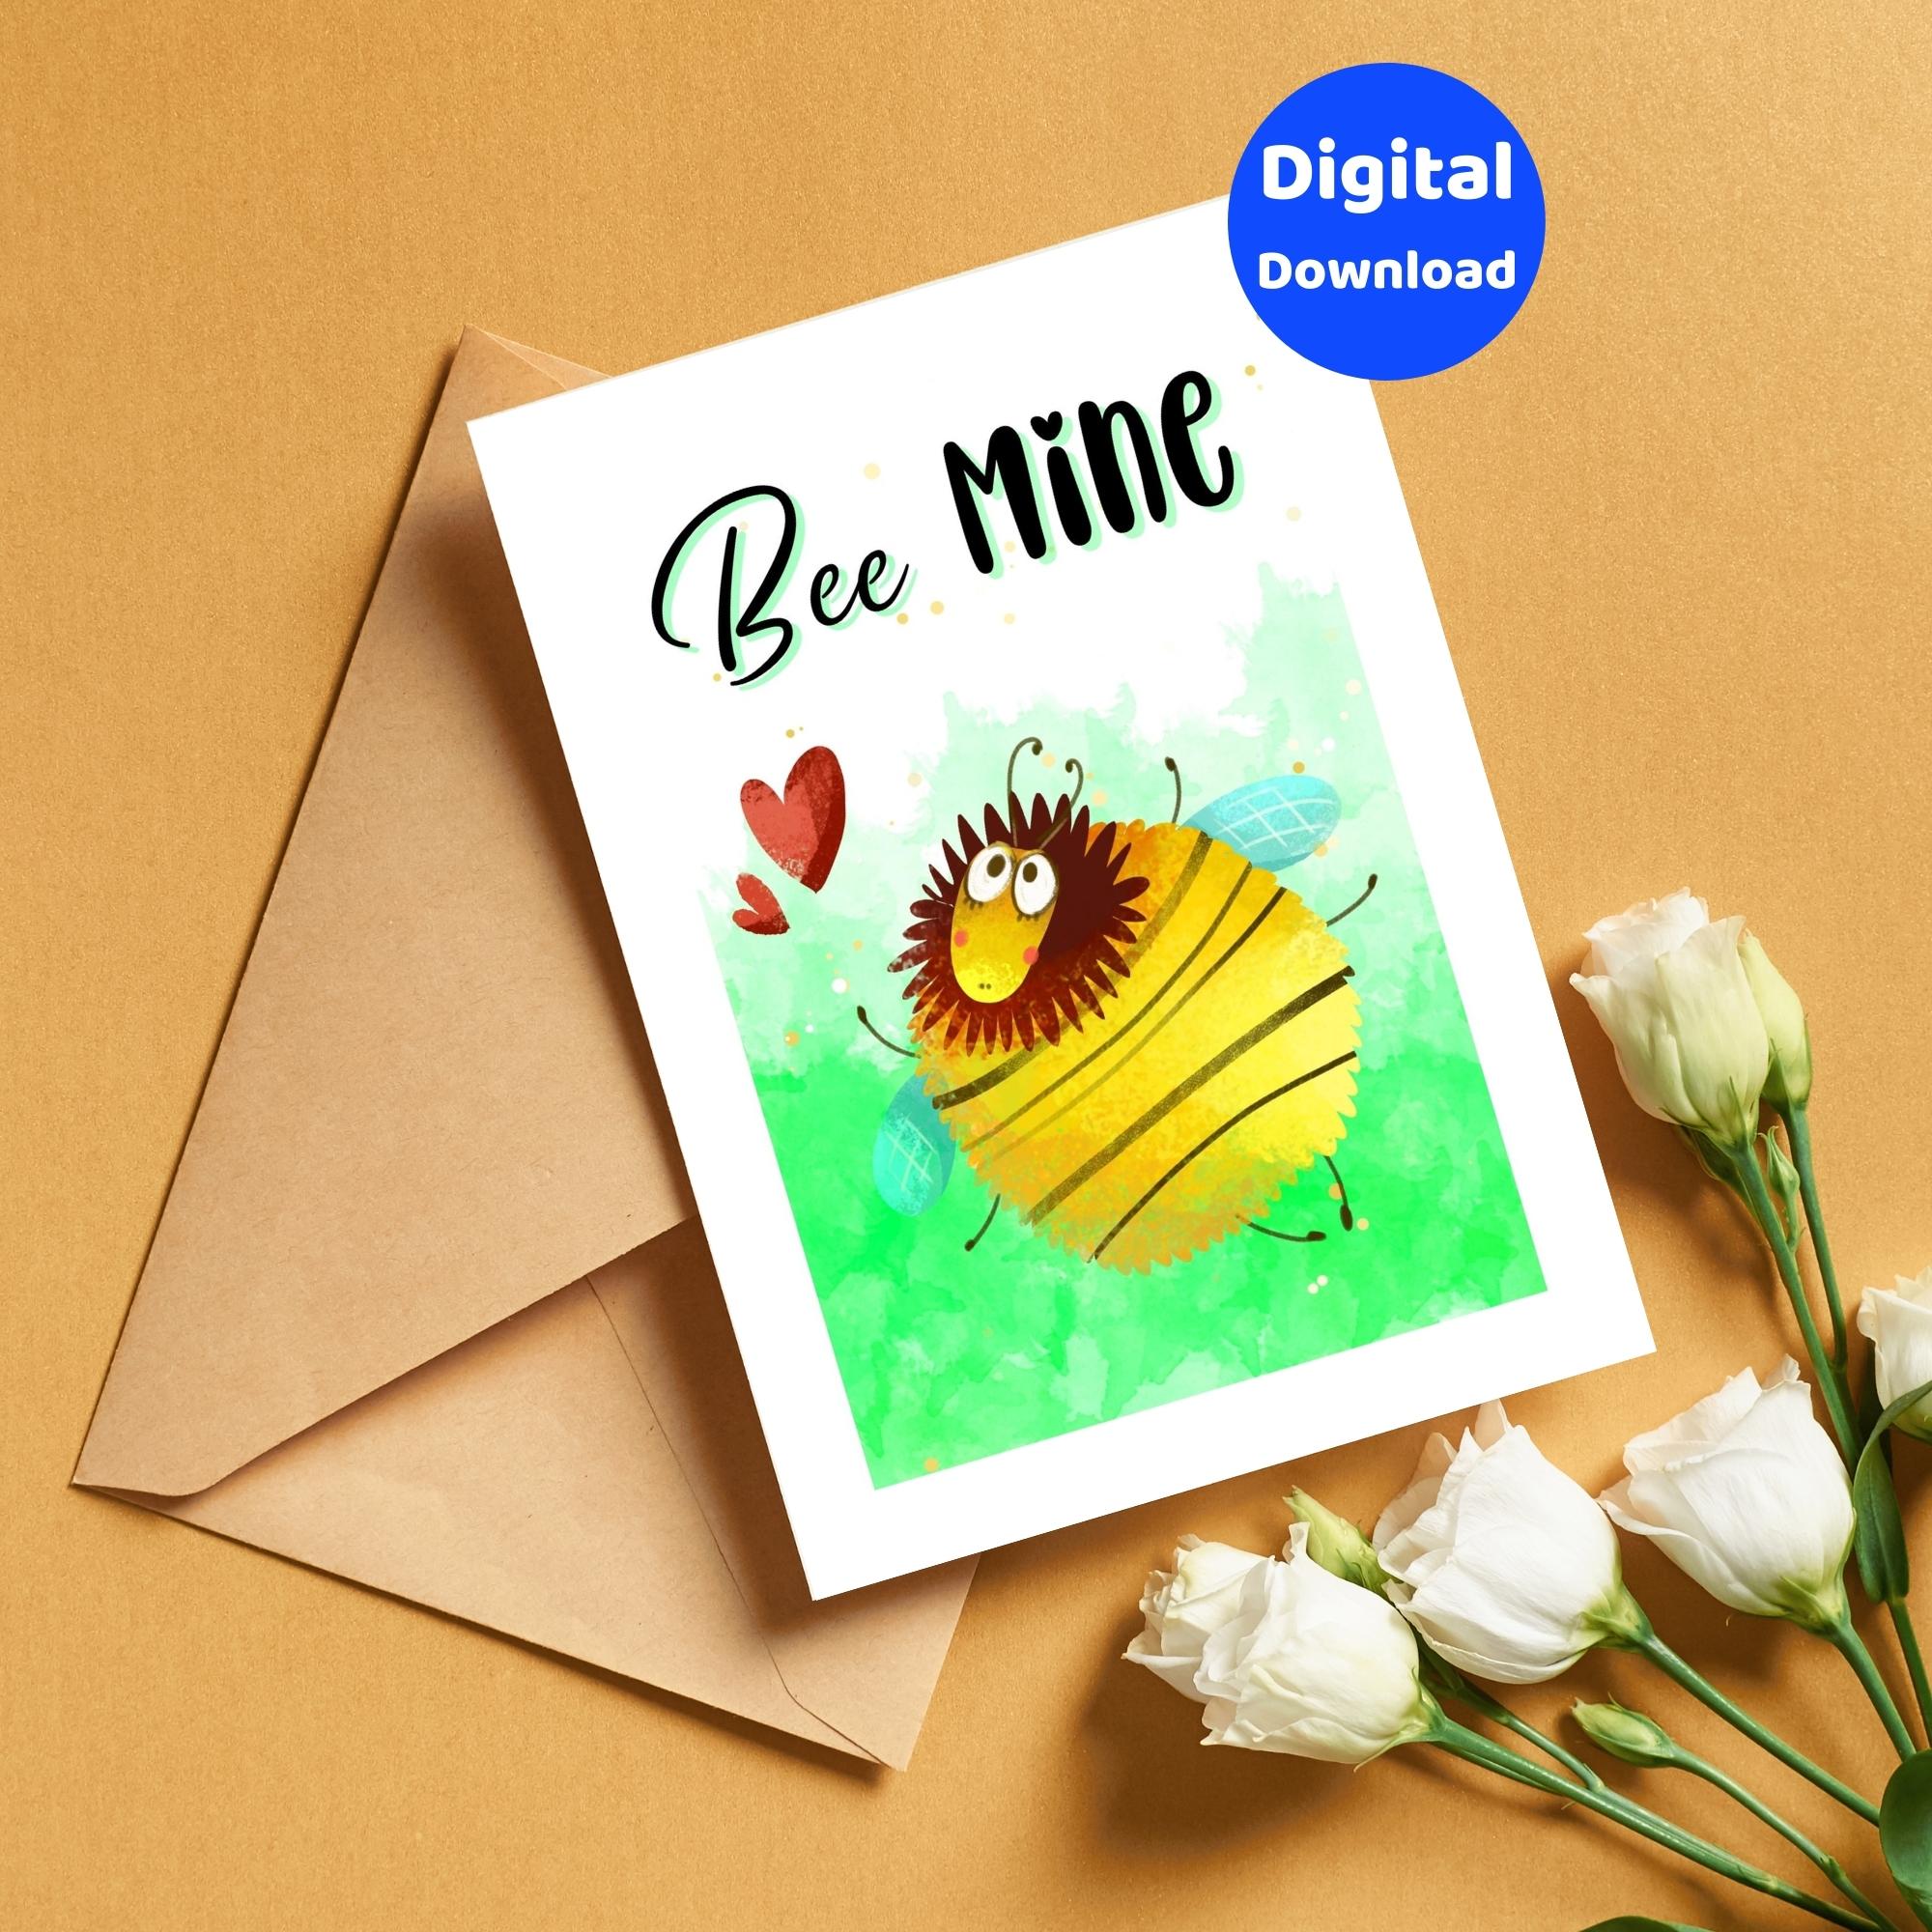 A printable bee greeting card with the sentiment "Bee Mine".